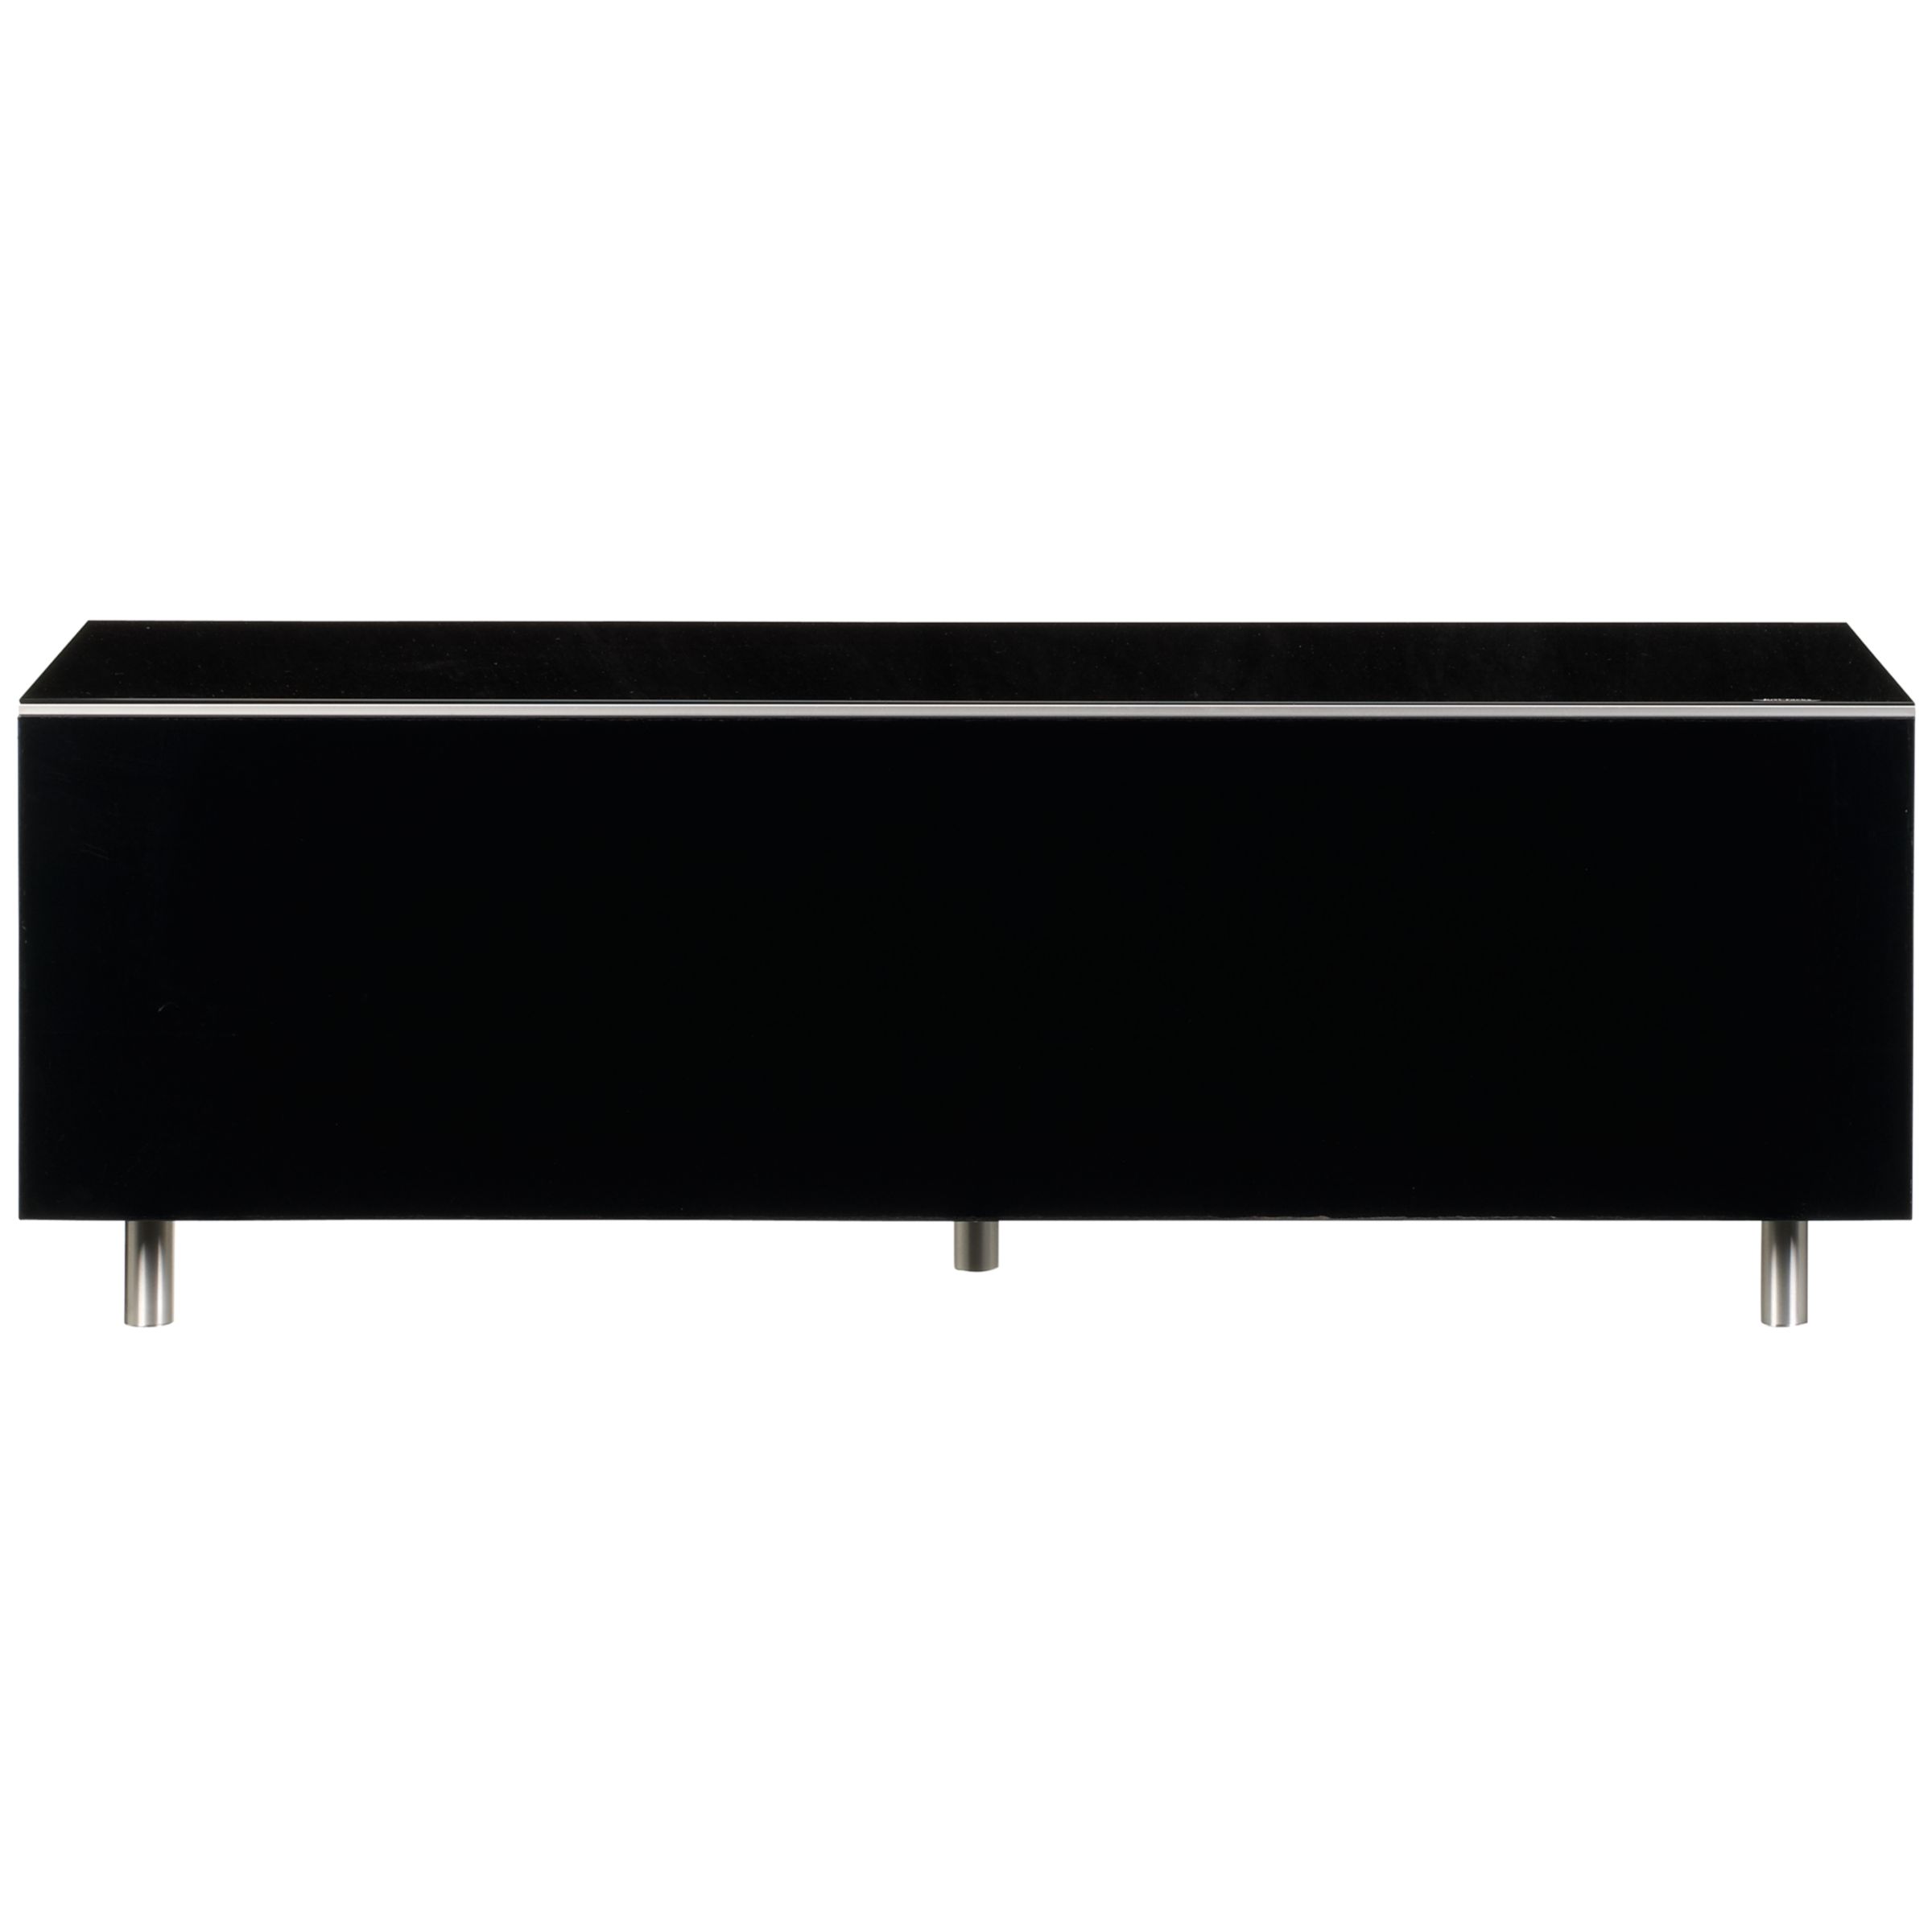 Spectral Just Racks JR1100 TV Stand for TVs up to 42-inch, width 110cm